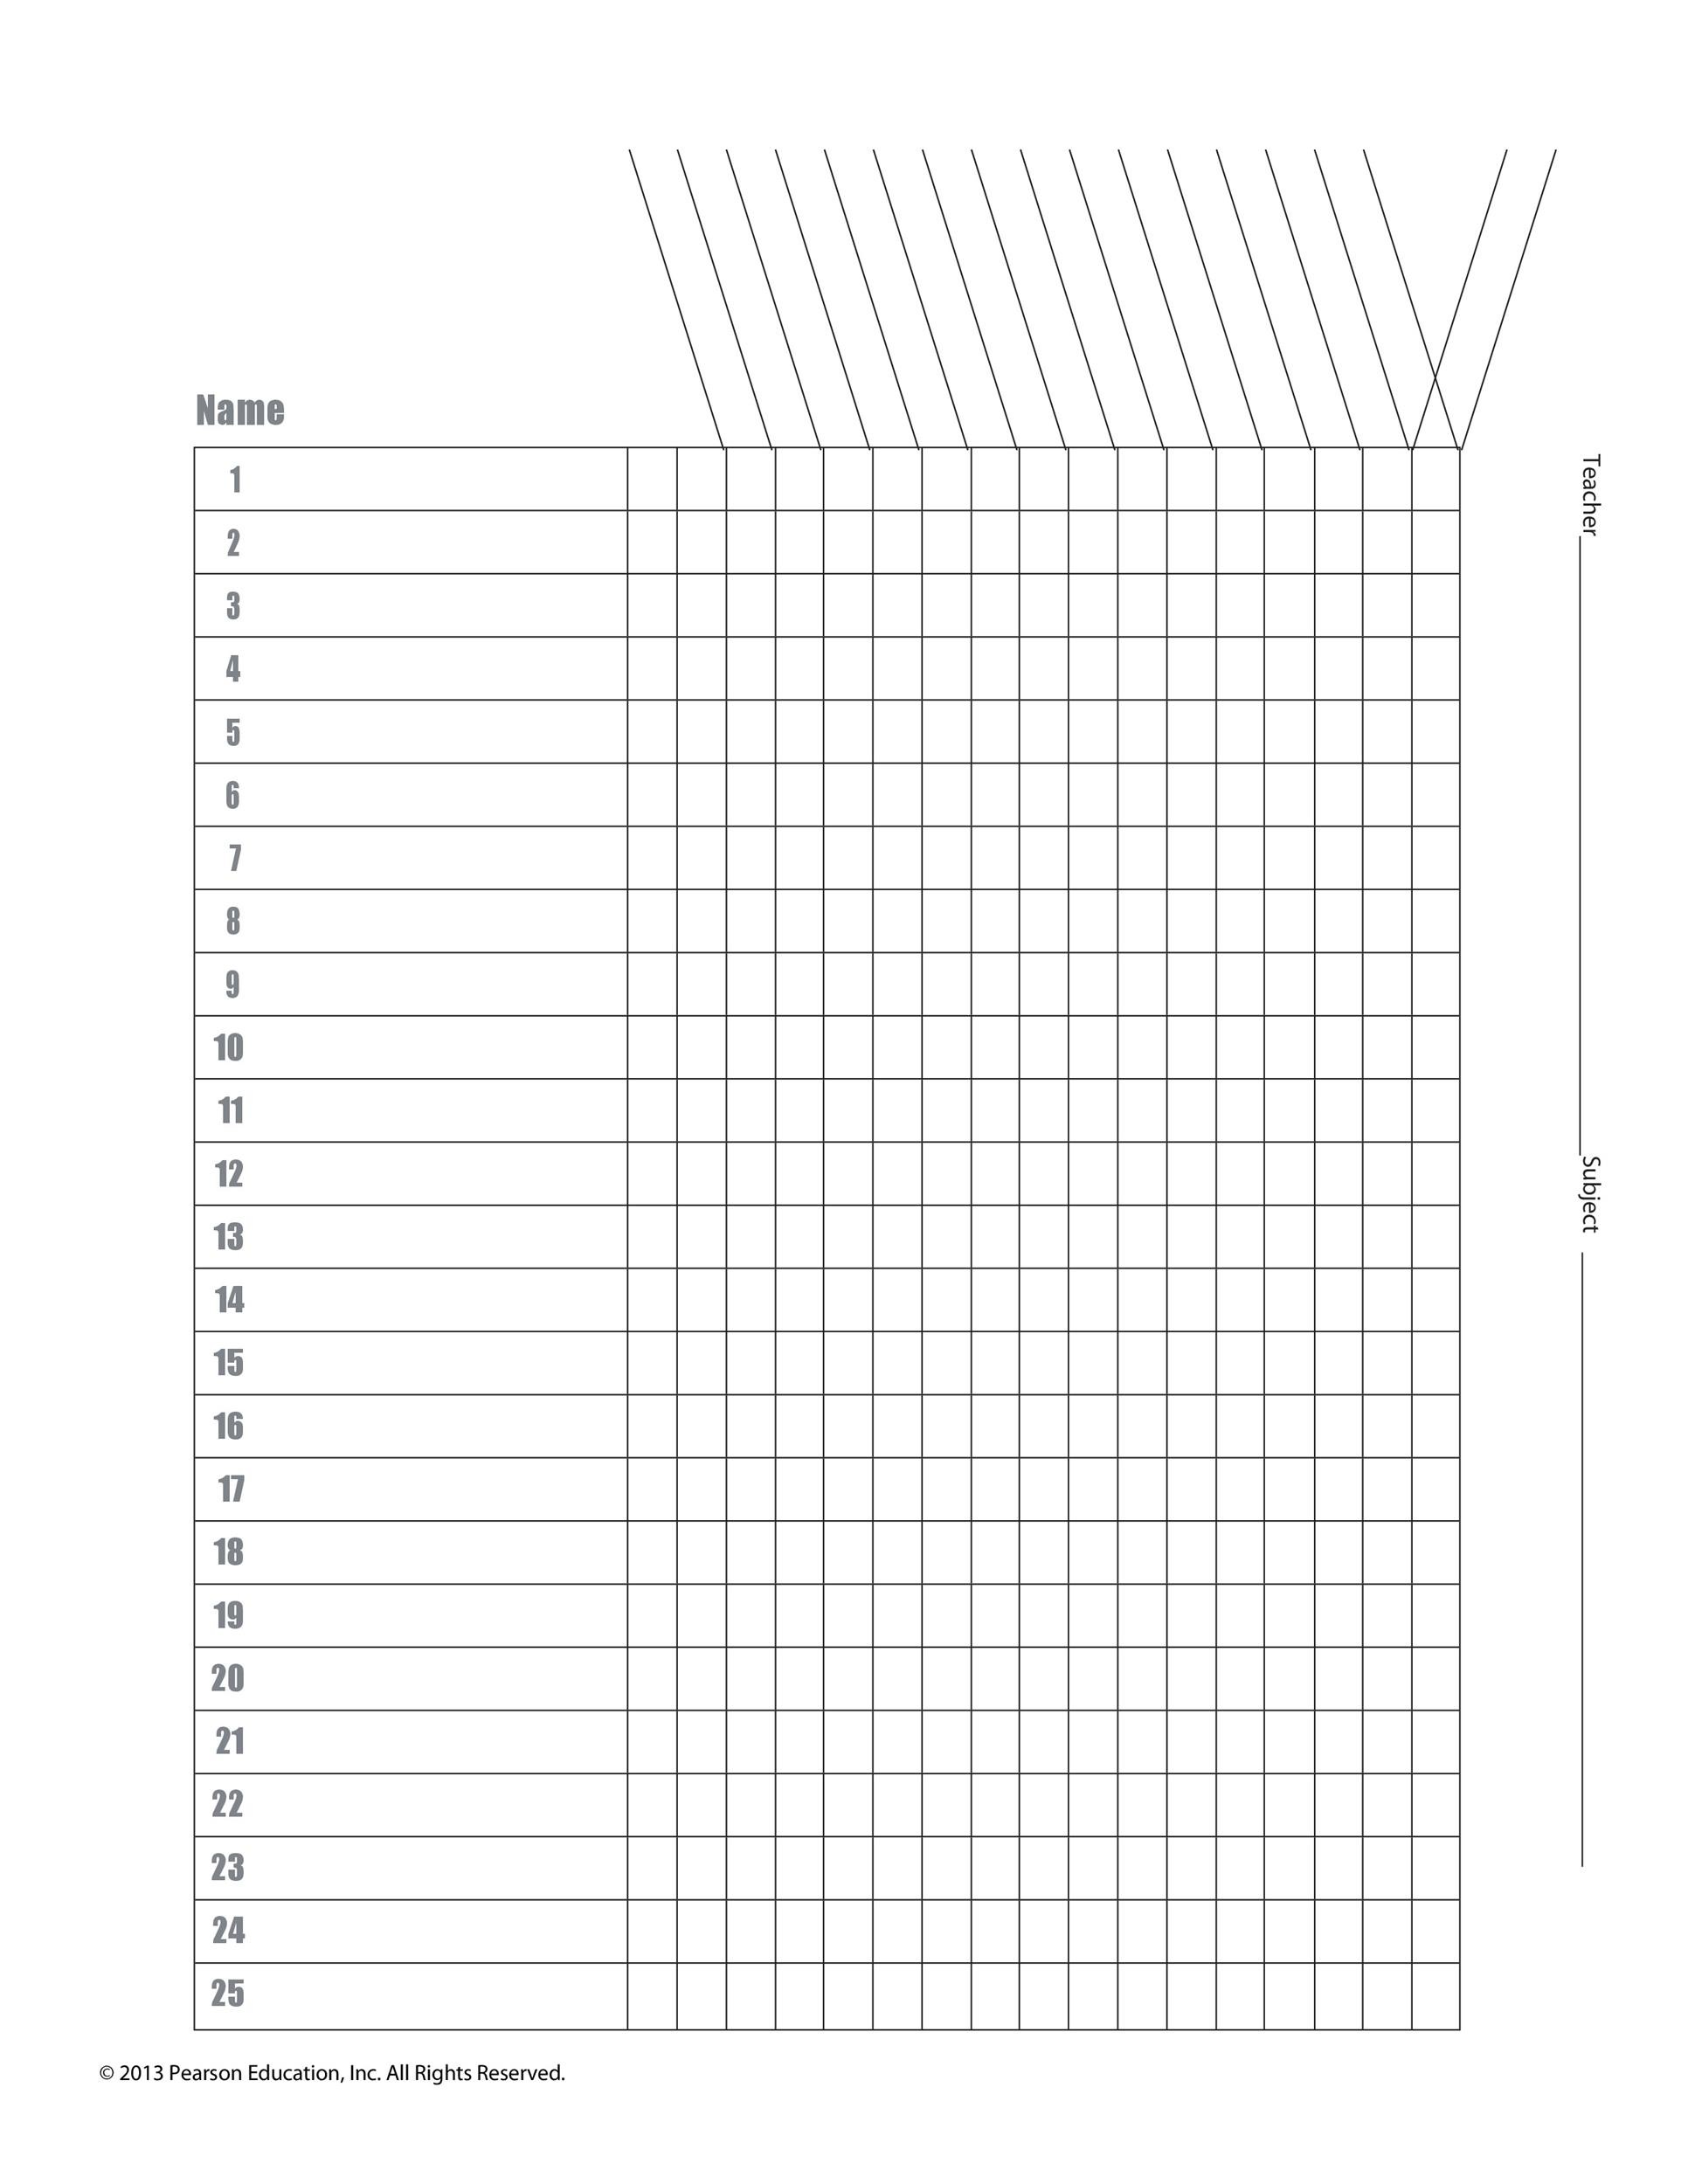 free-printable-class-roster-template-printable-templates